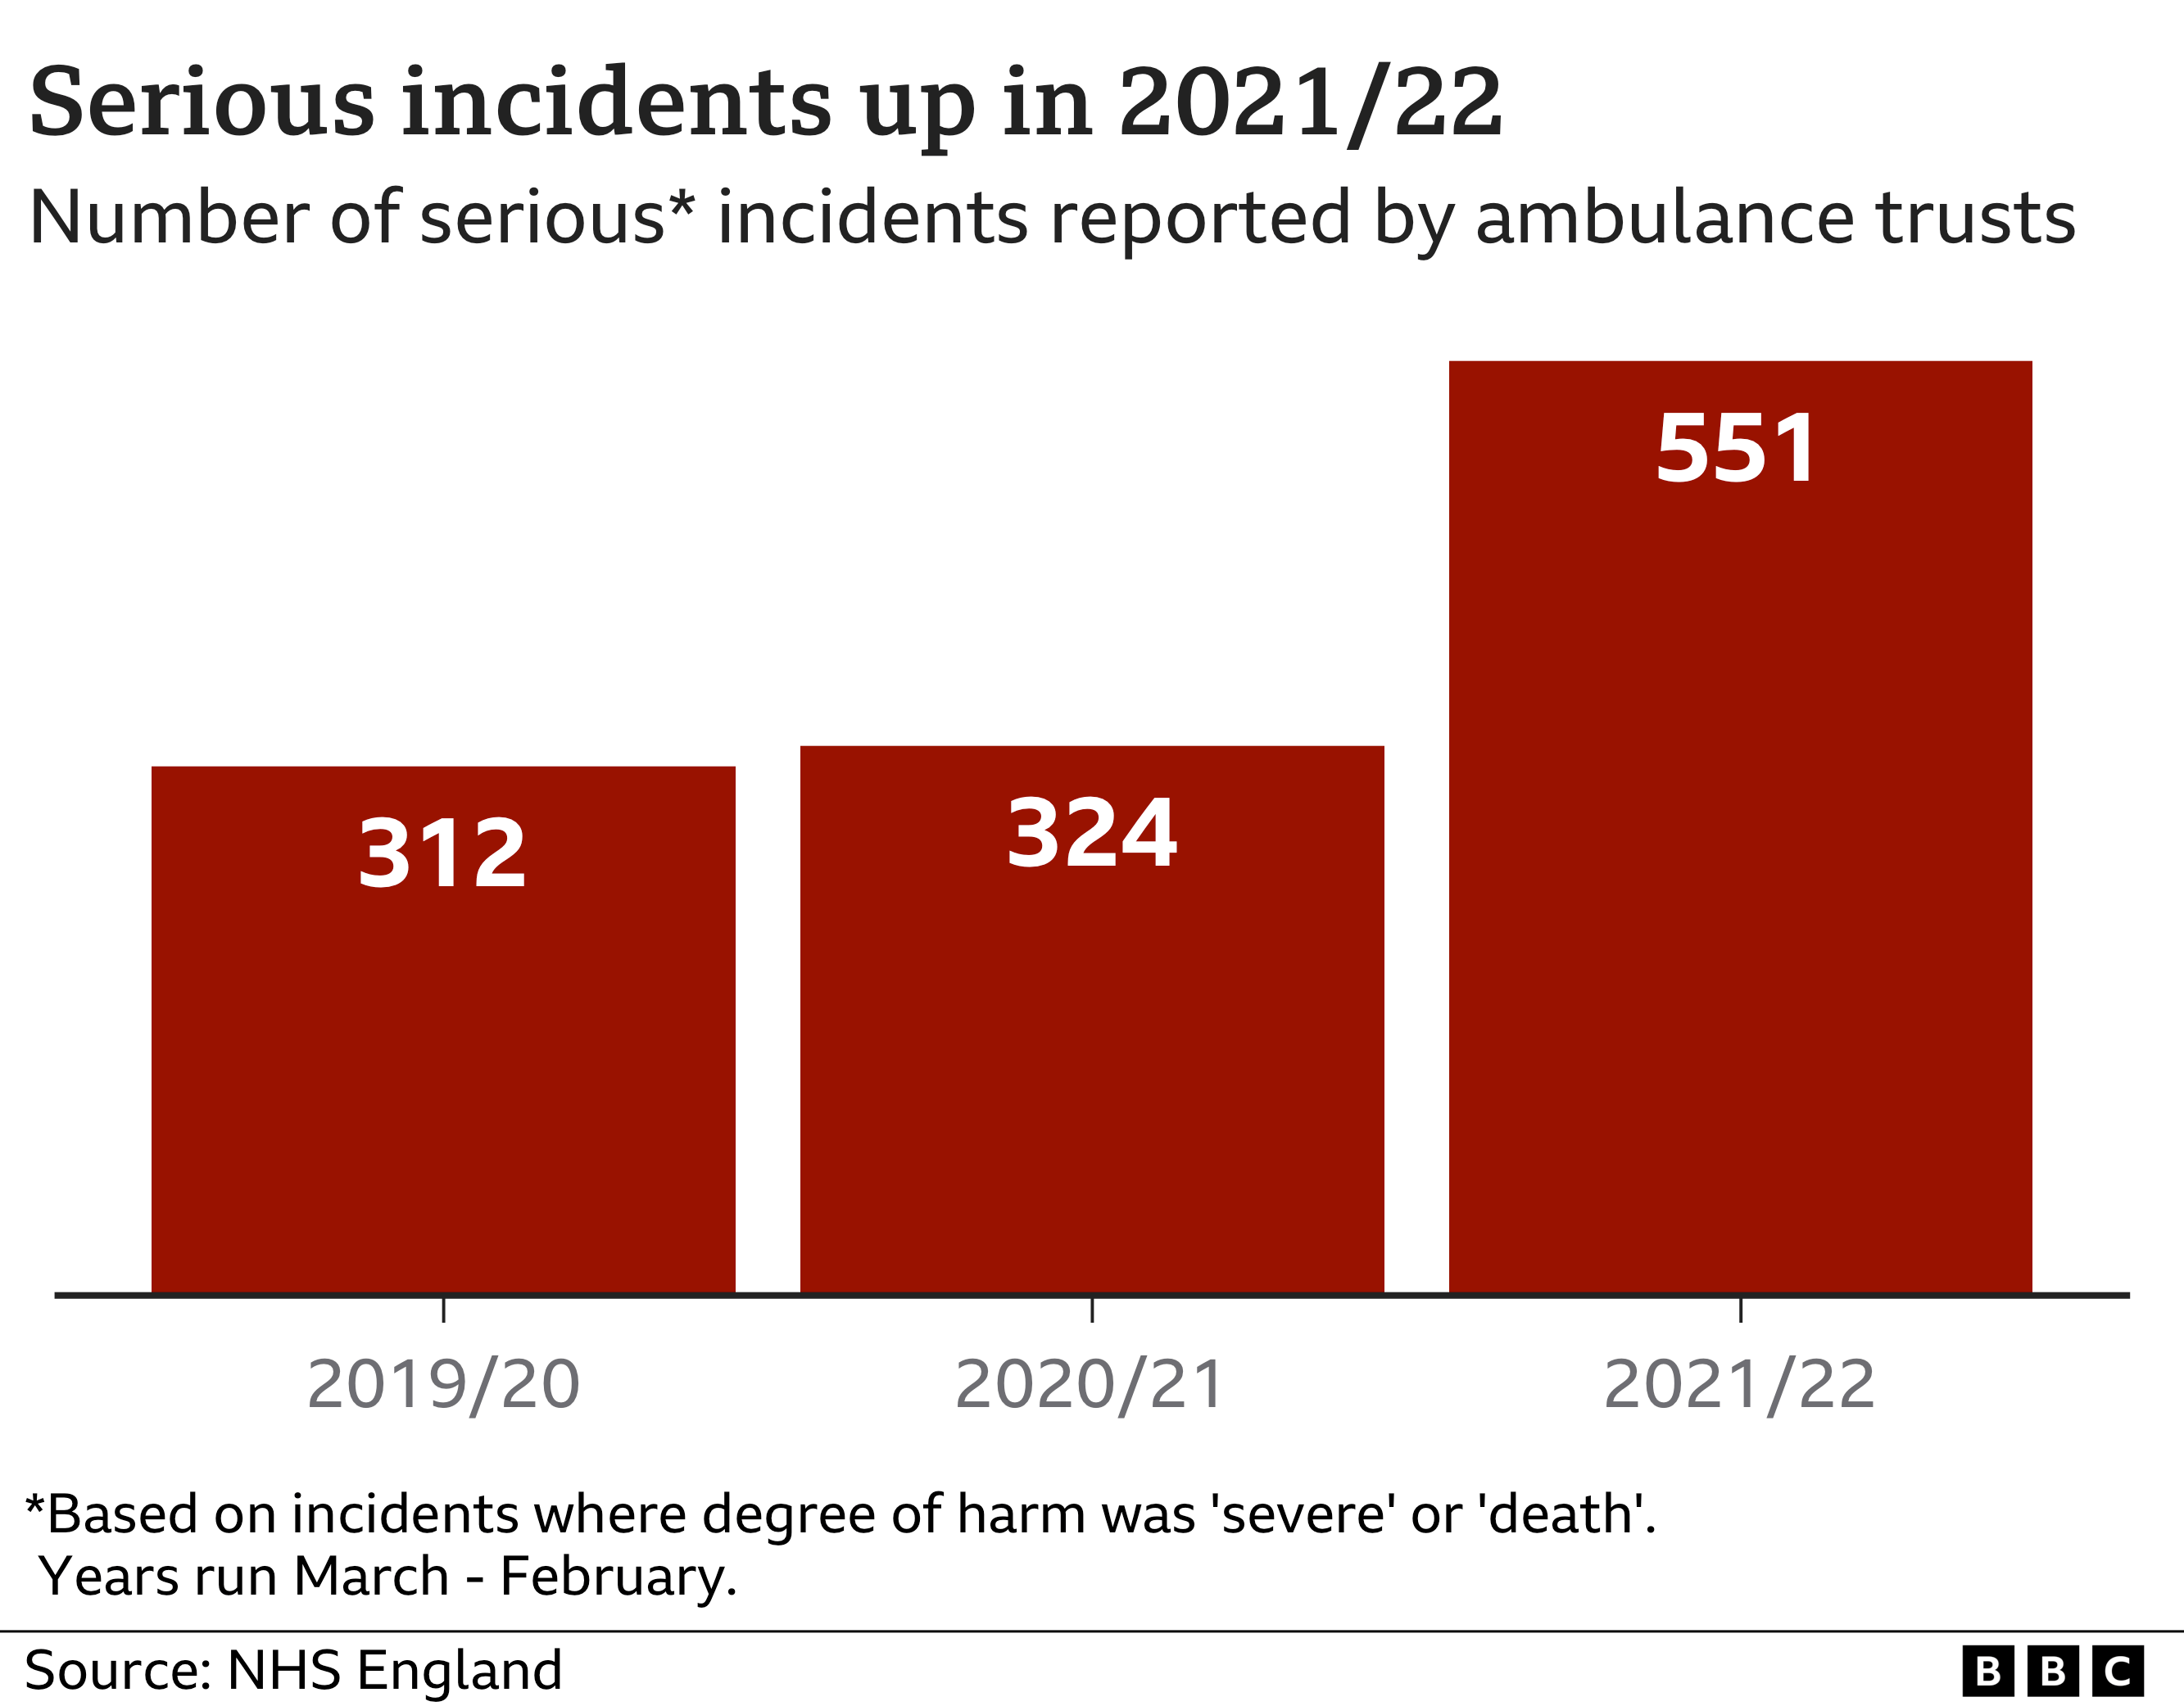 Serious incidents up in 2021-22 in England